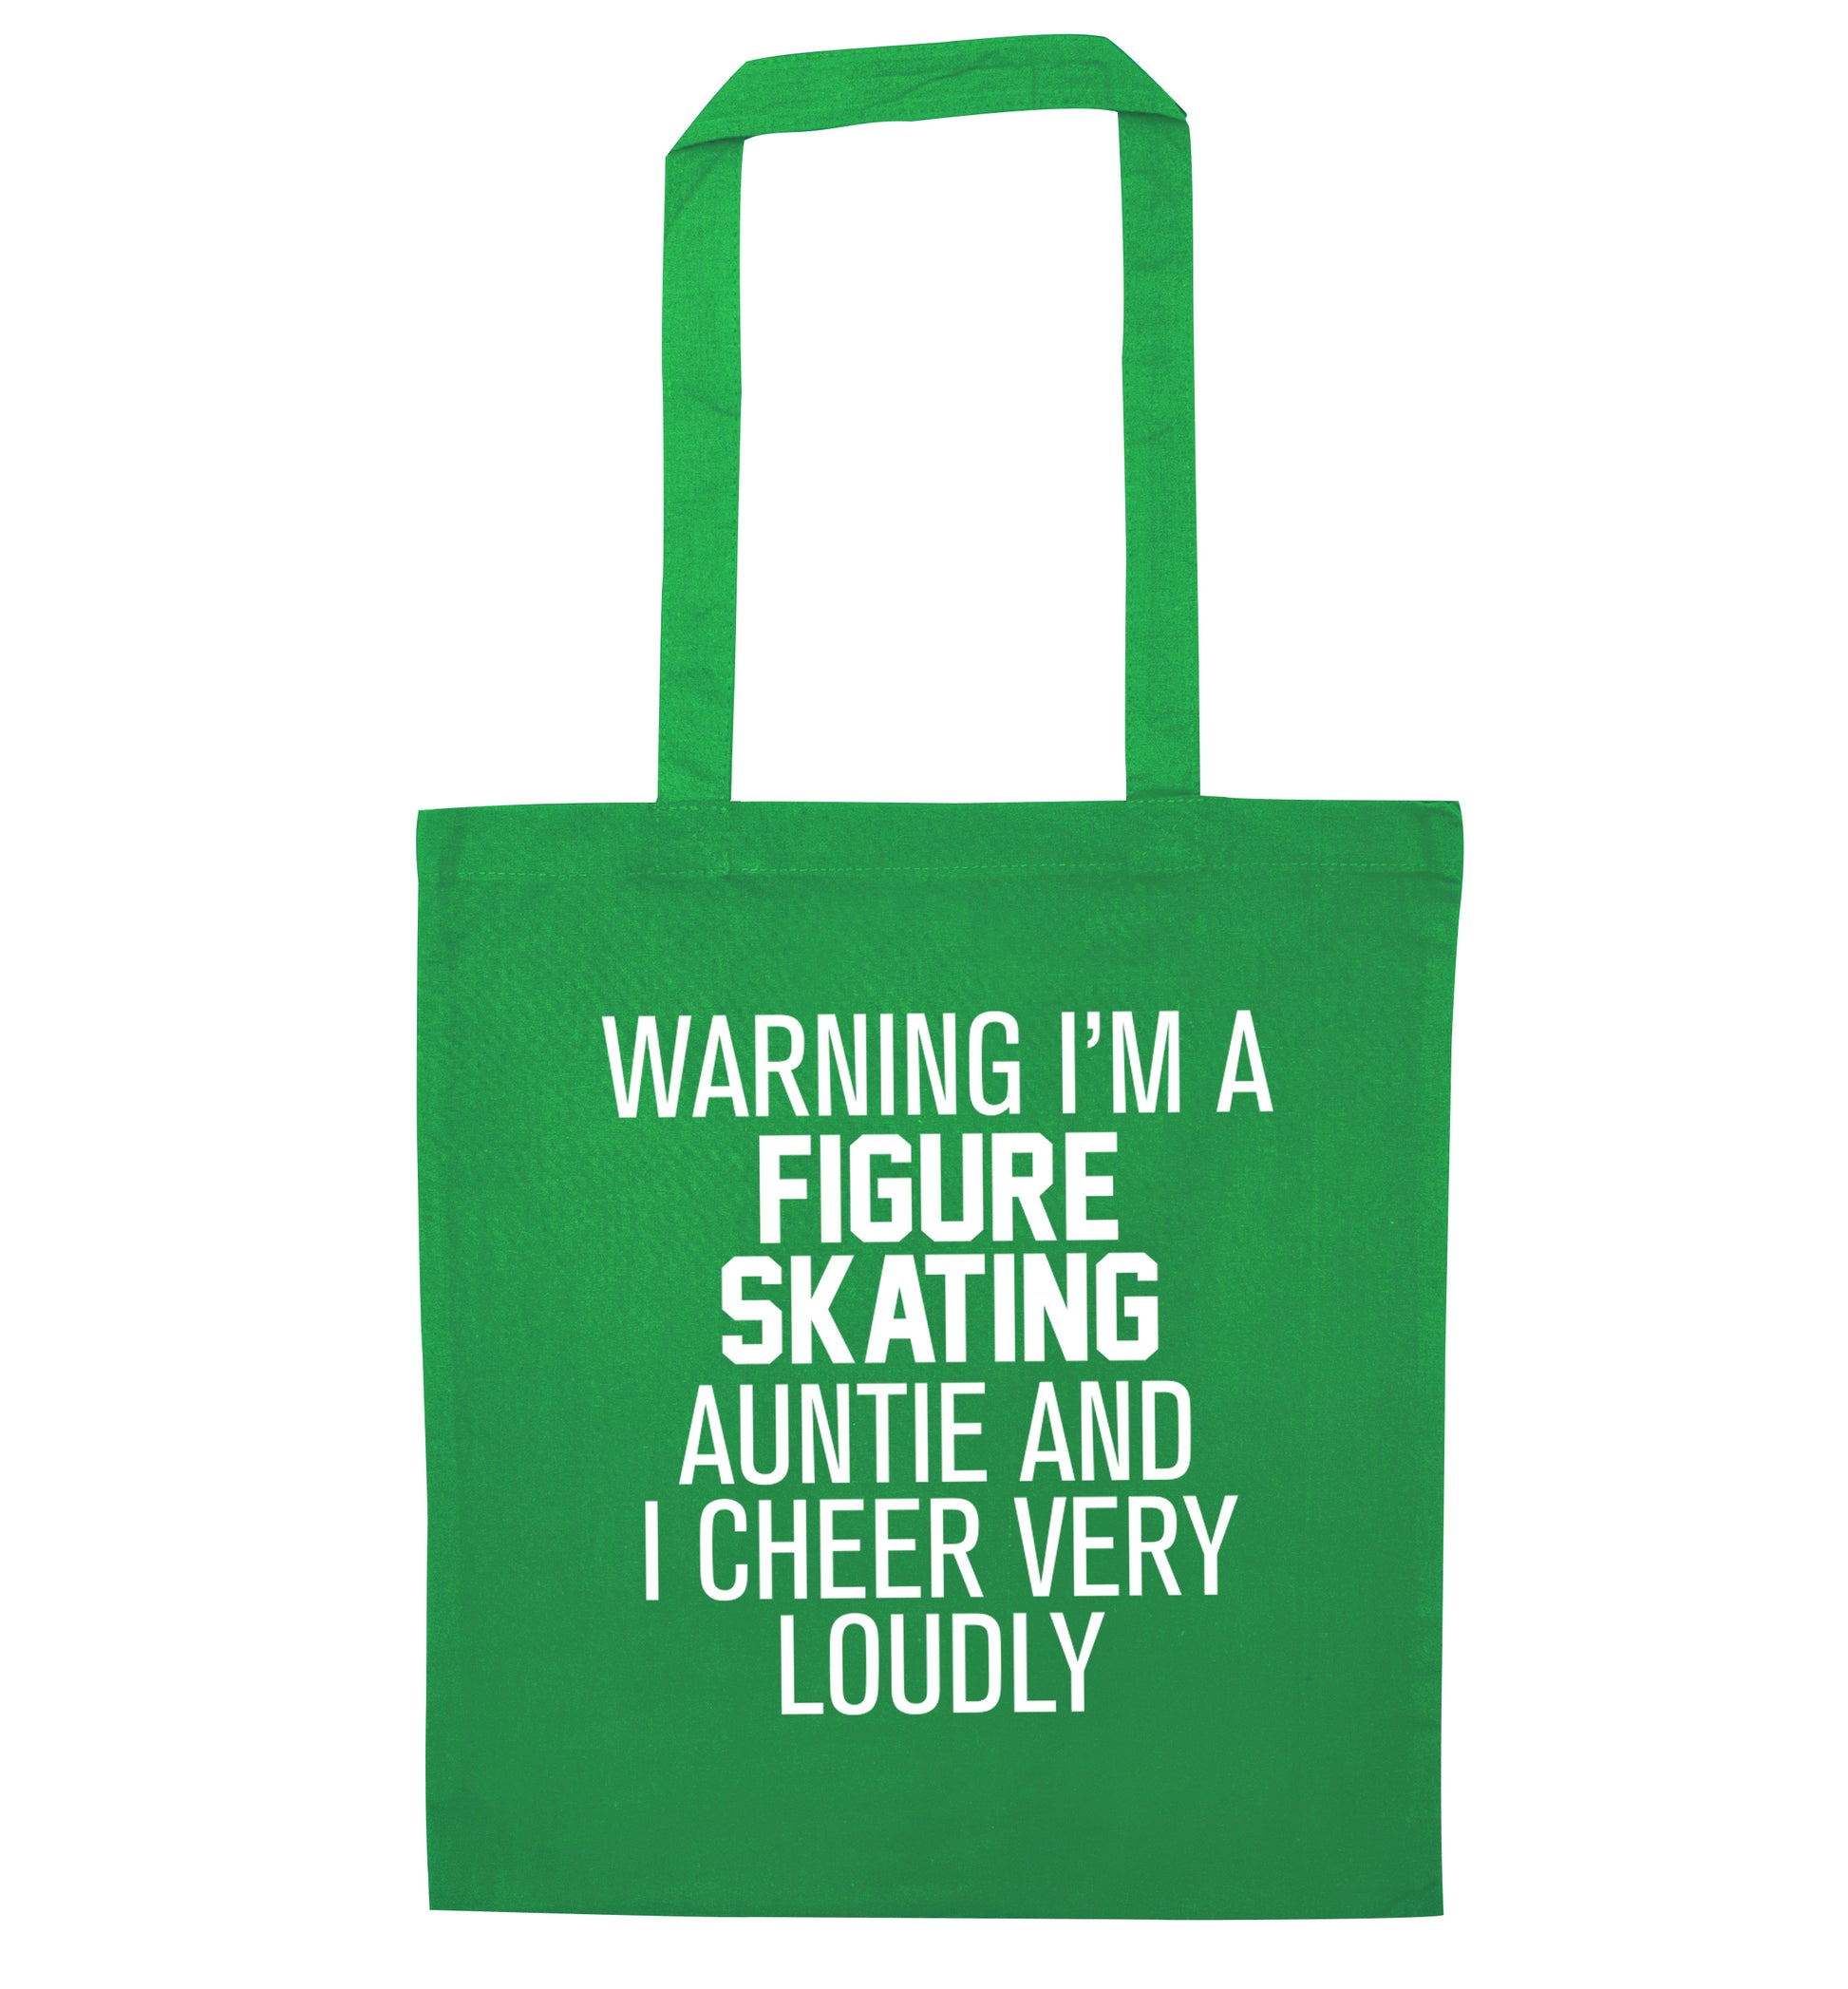 Warning I'm a figure skating auntie and I cheer very loudly green tote bag